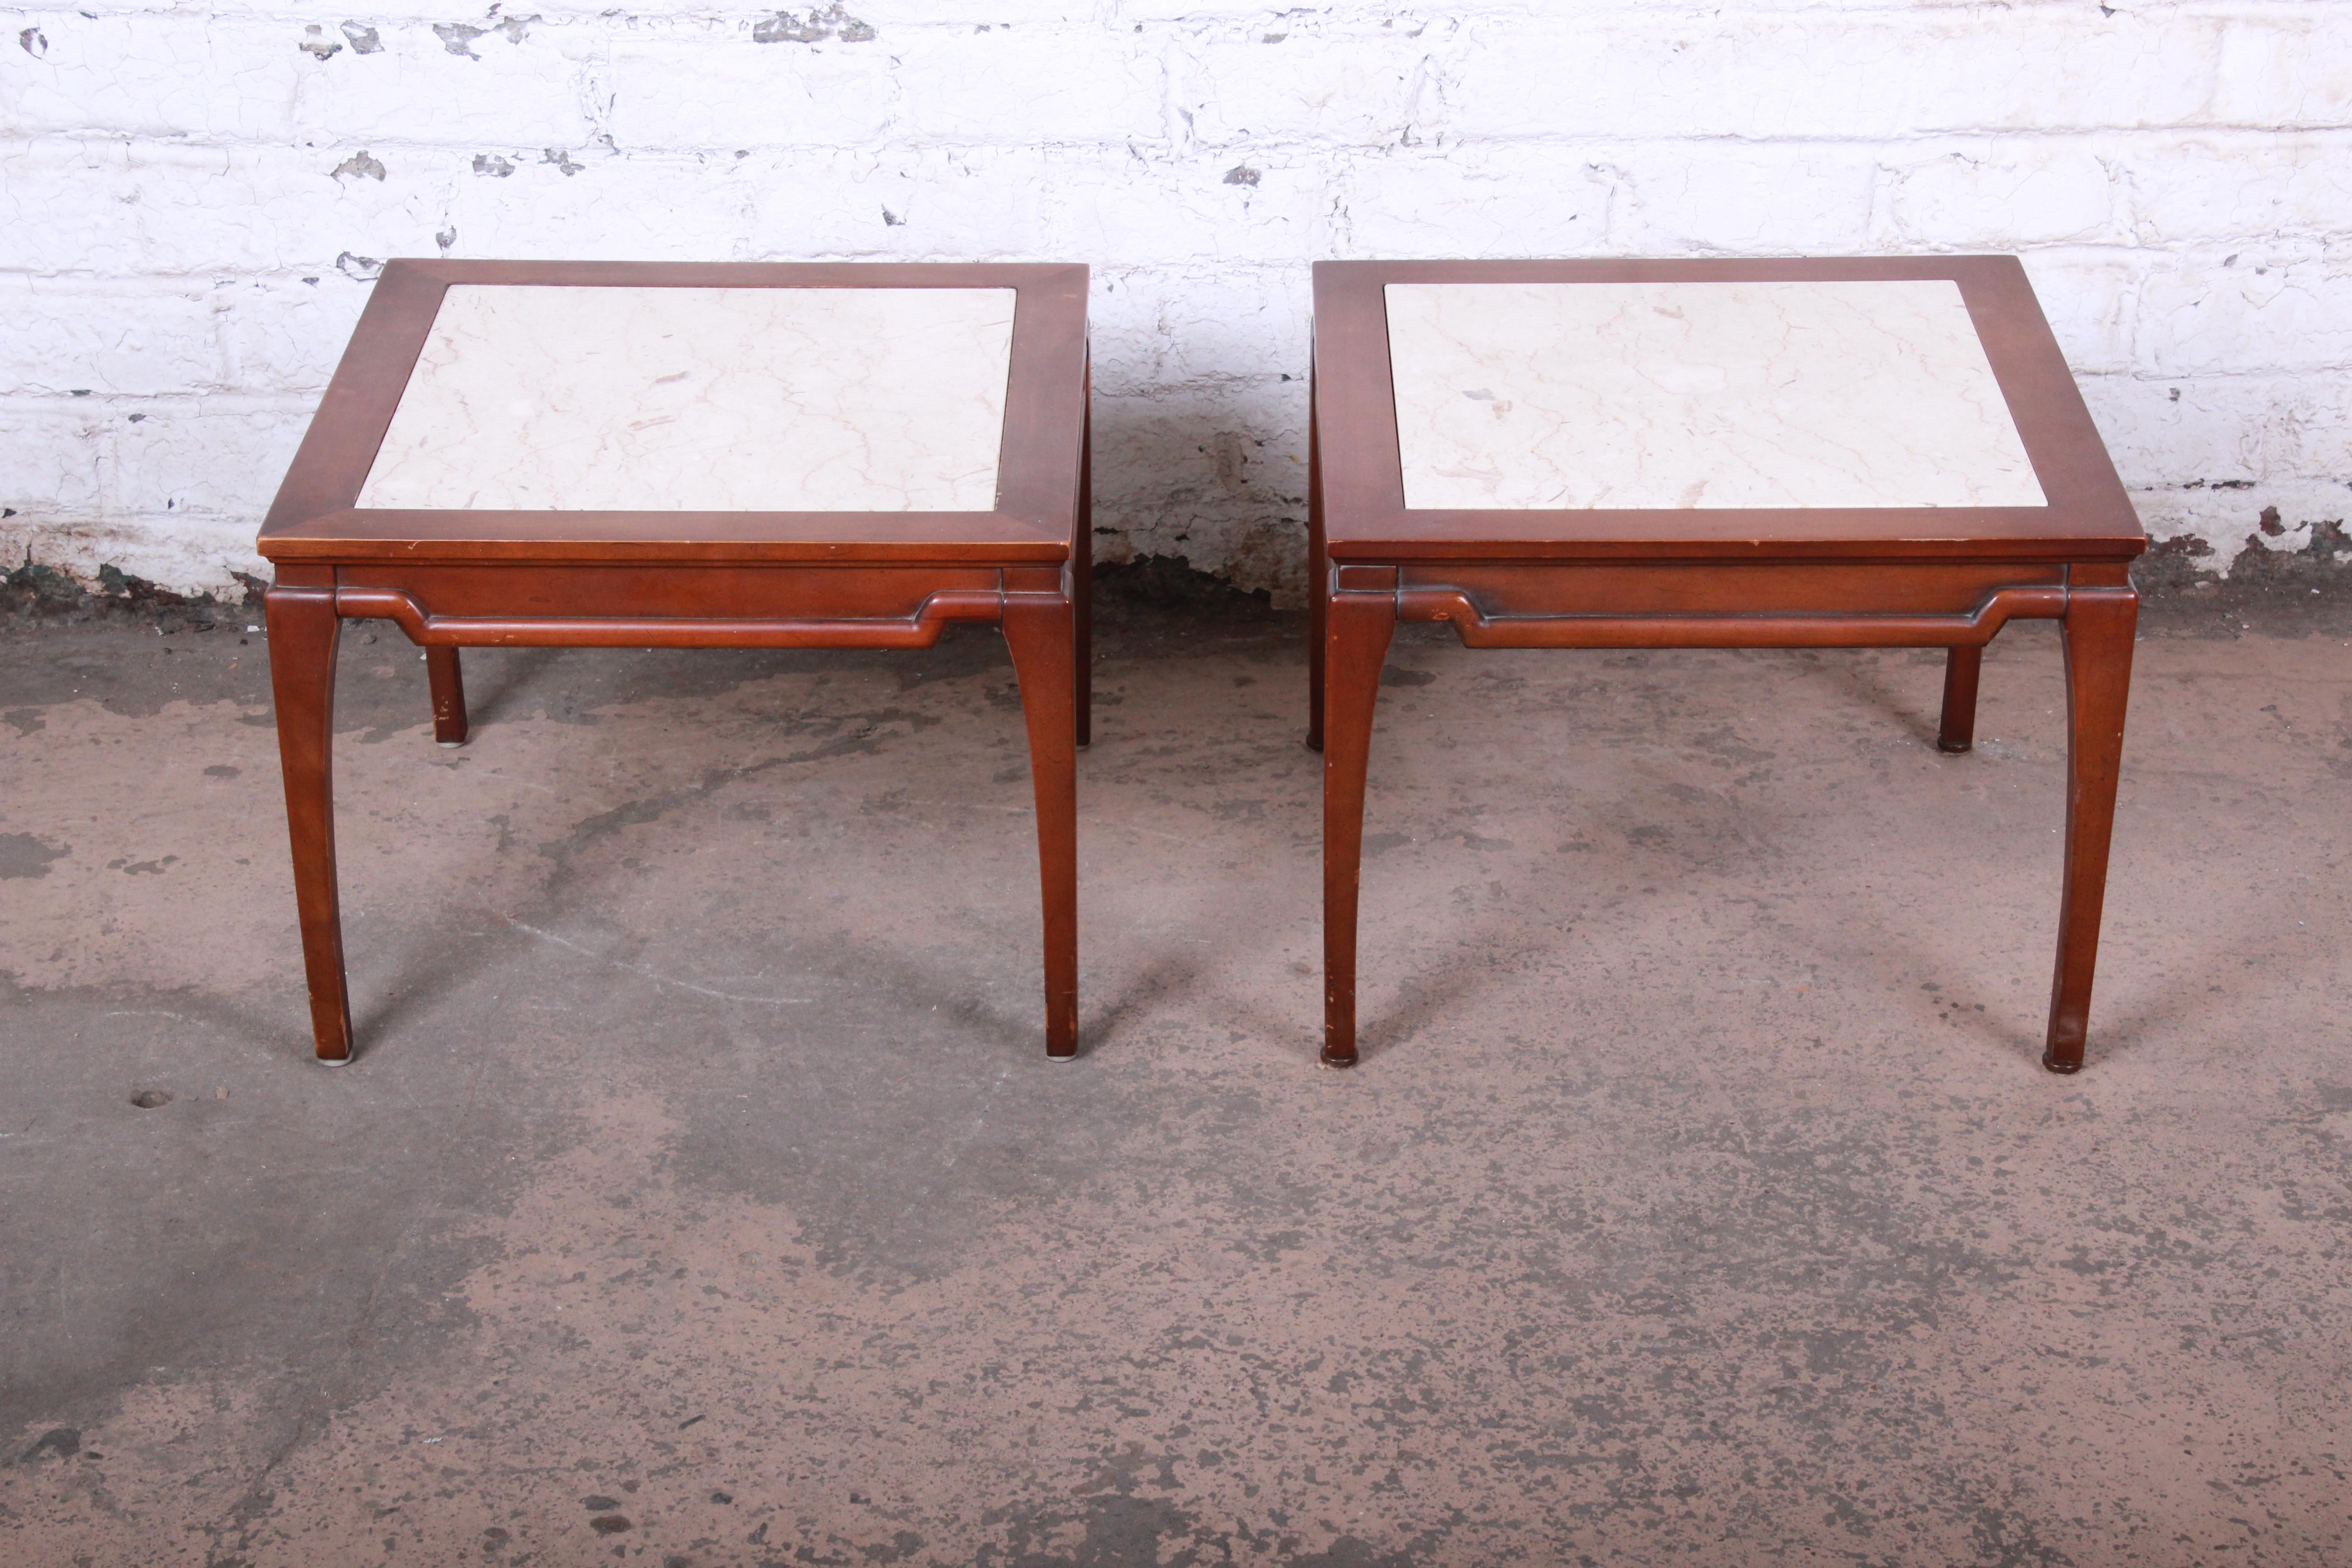 A gorgeous pair of midcentury marble-top side tables. The tables feature beautiful fruitwood frames with inset Italian marble tops. Each table is stamped 